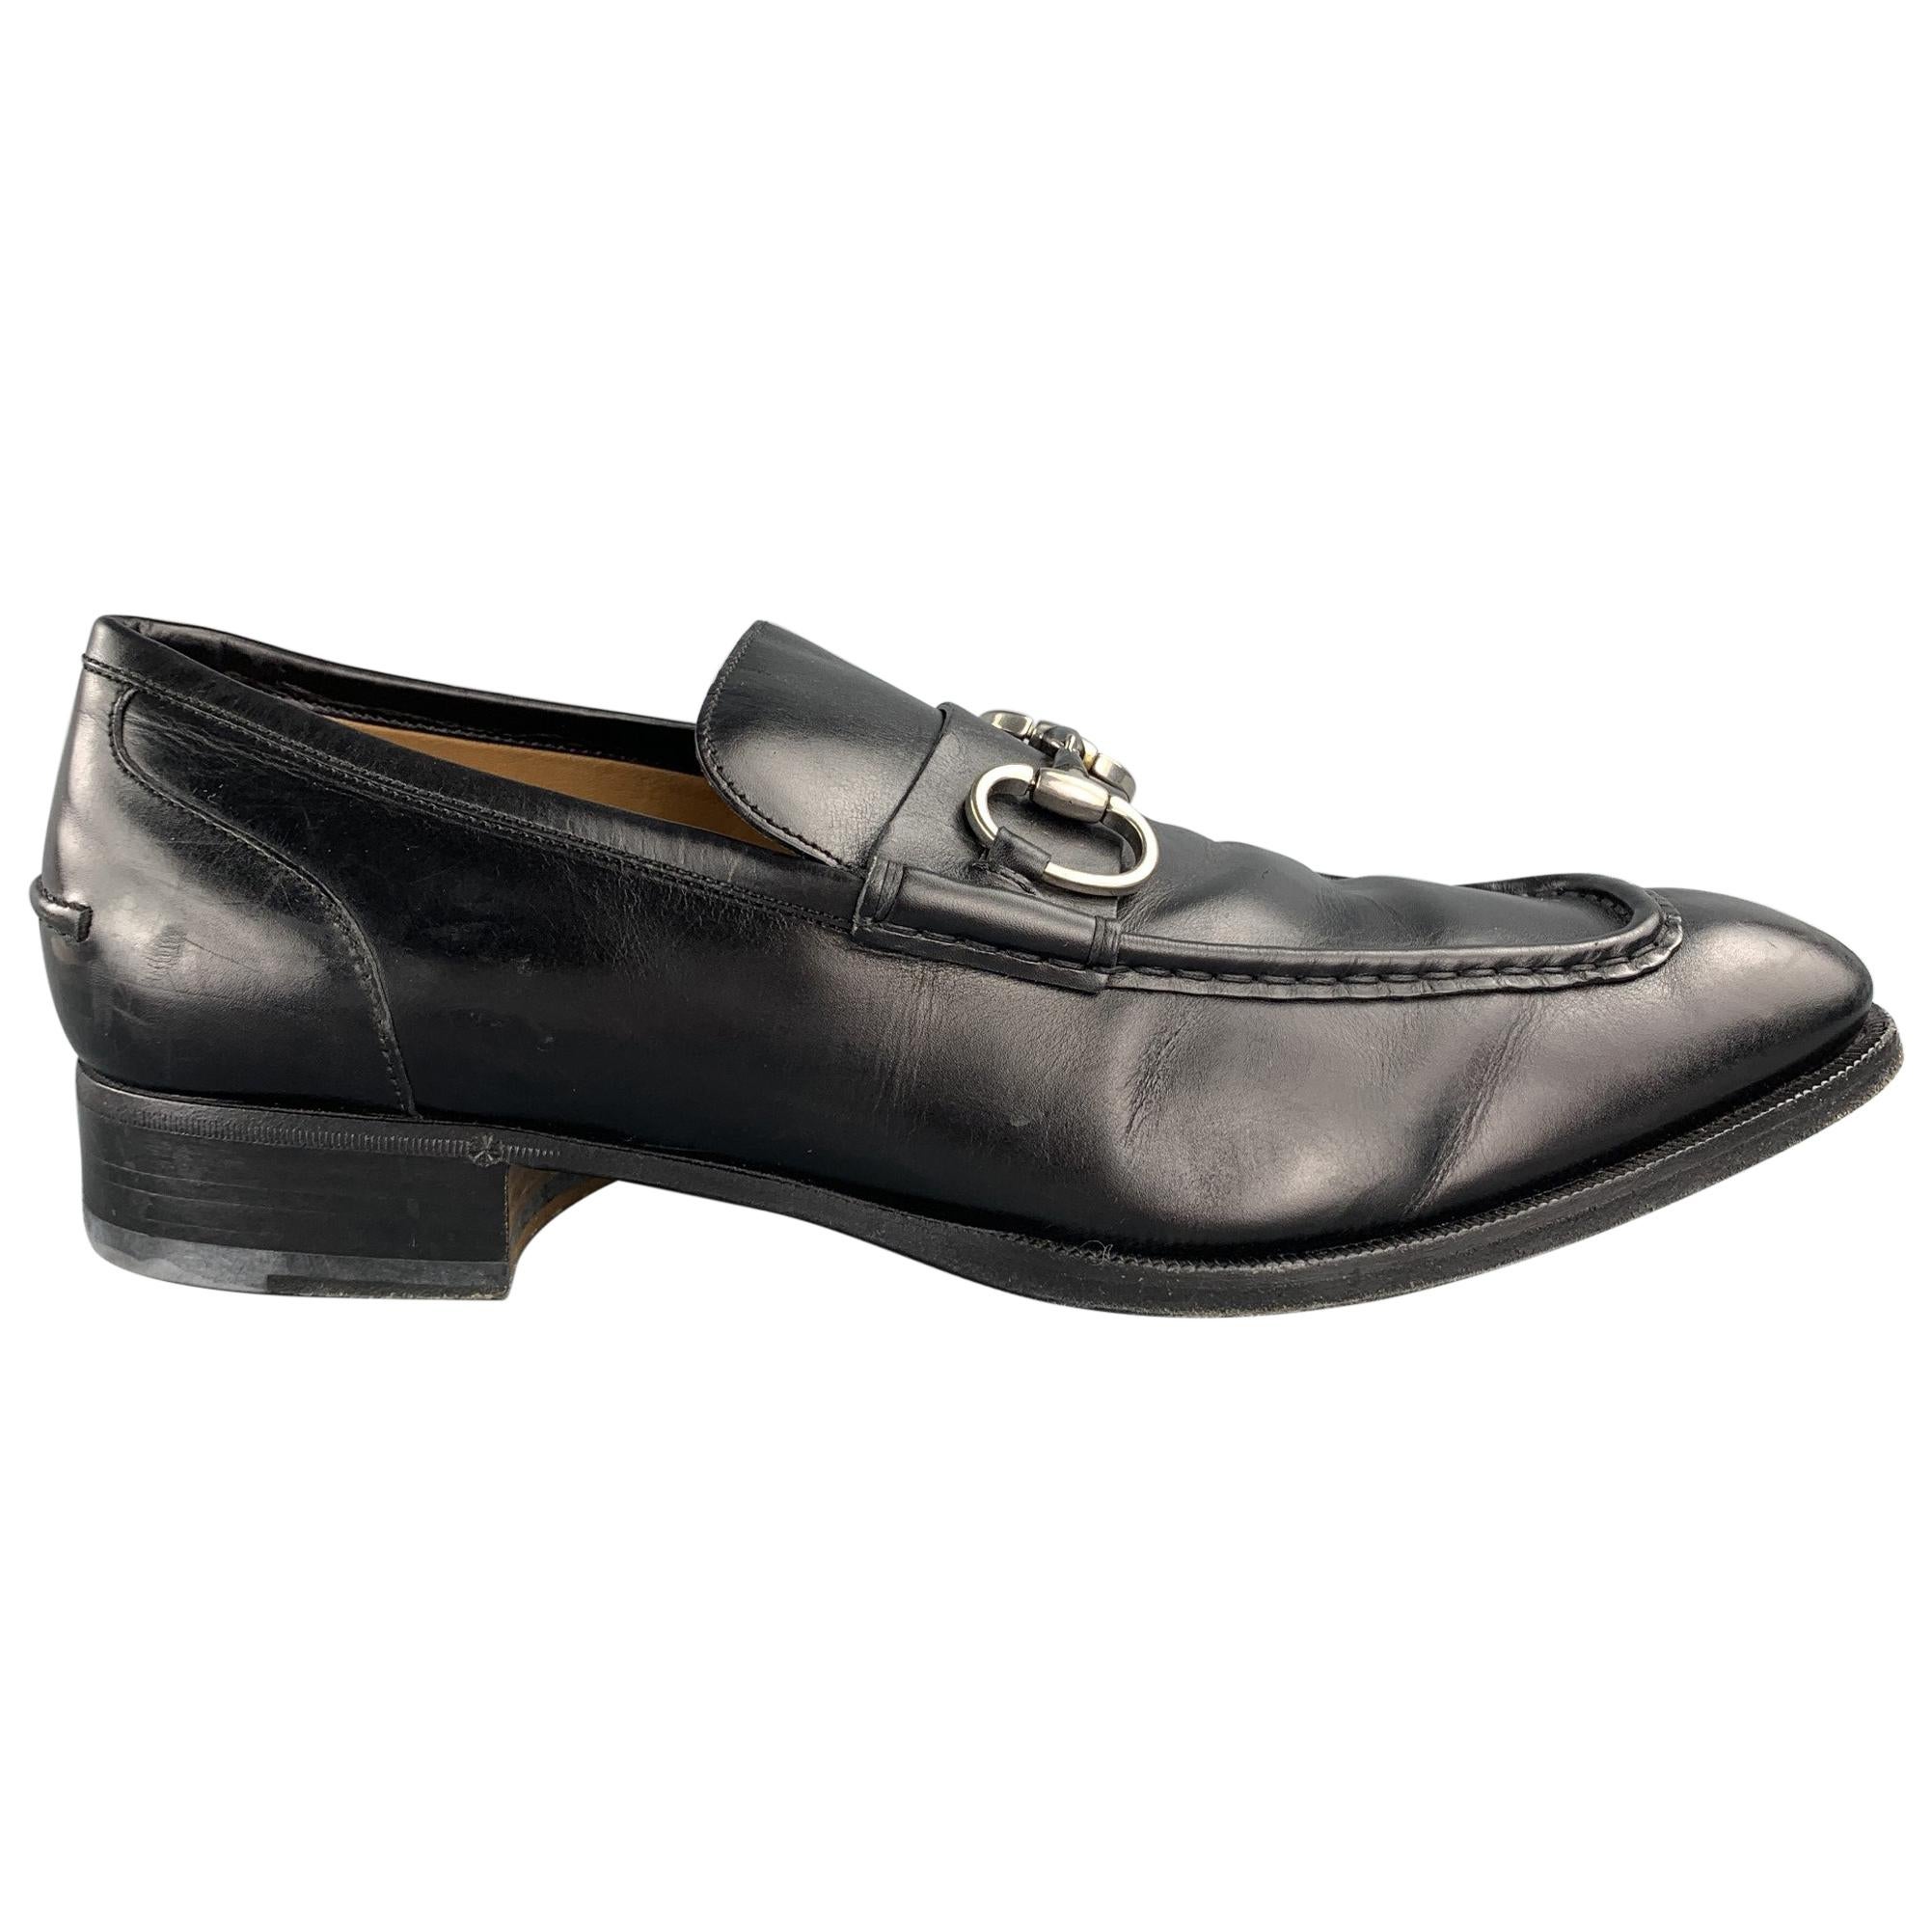 GUCCI Size 10.5 Black Leather Horsebit Loafers